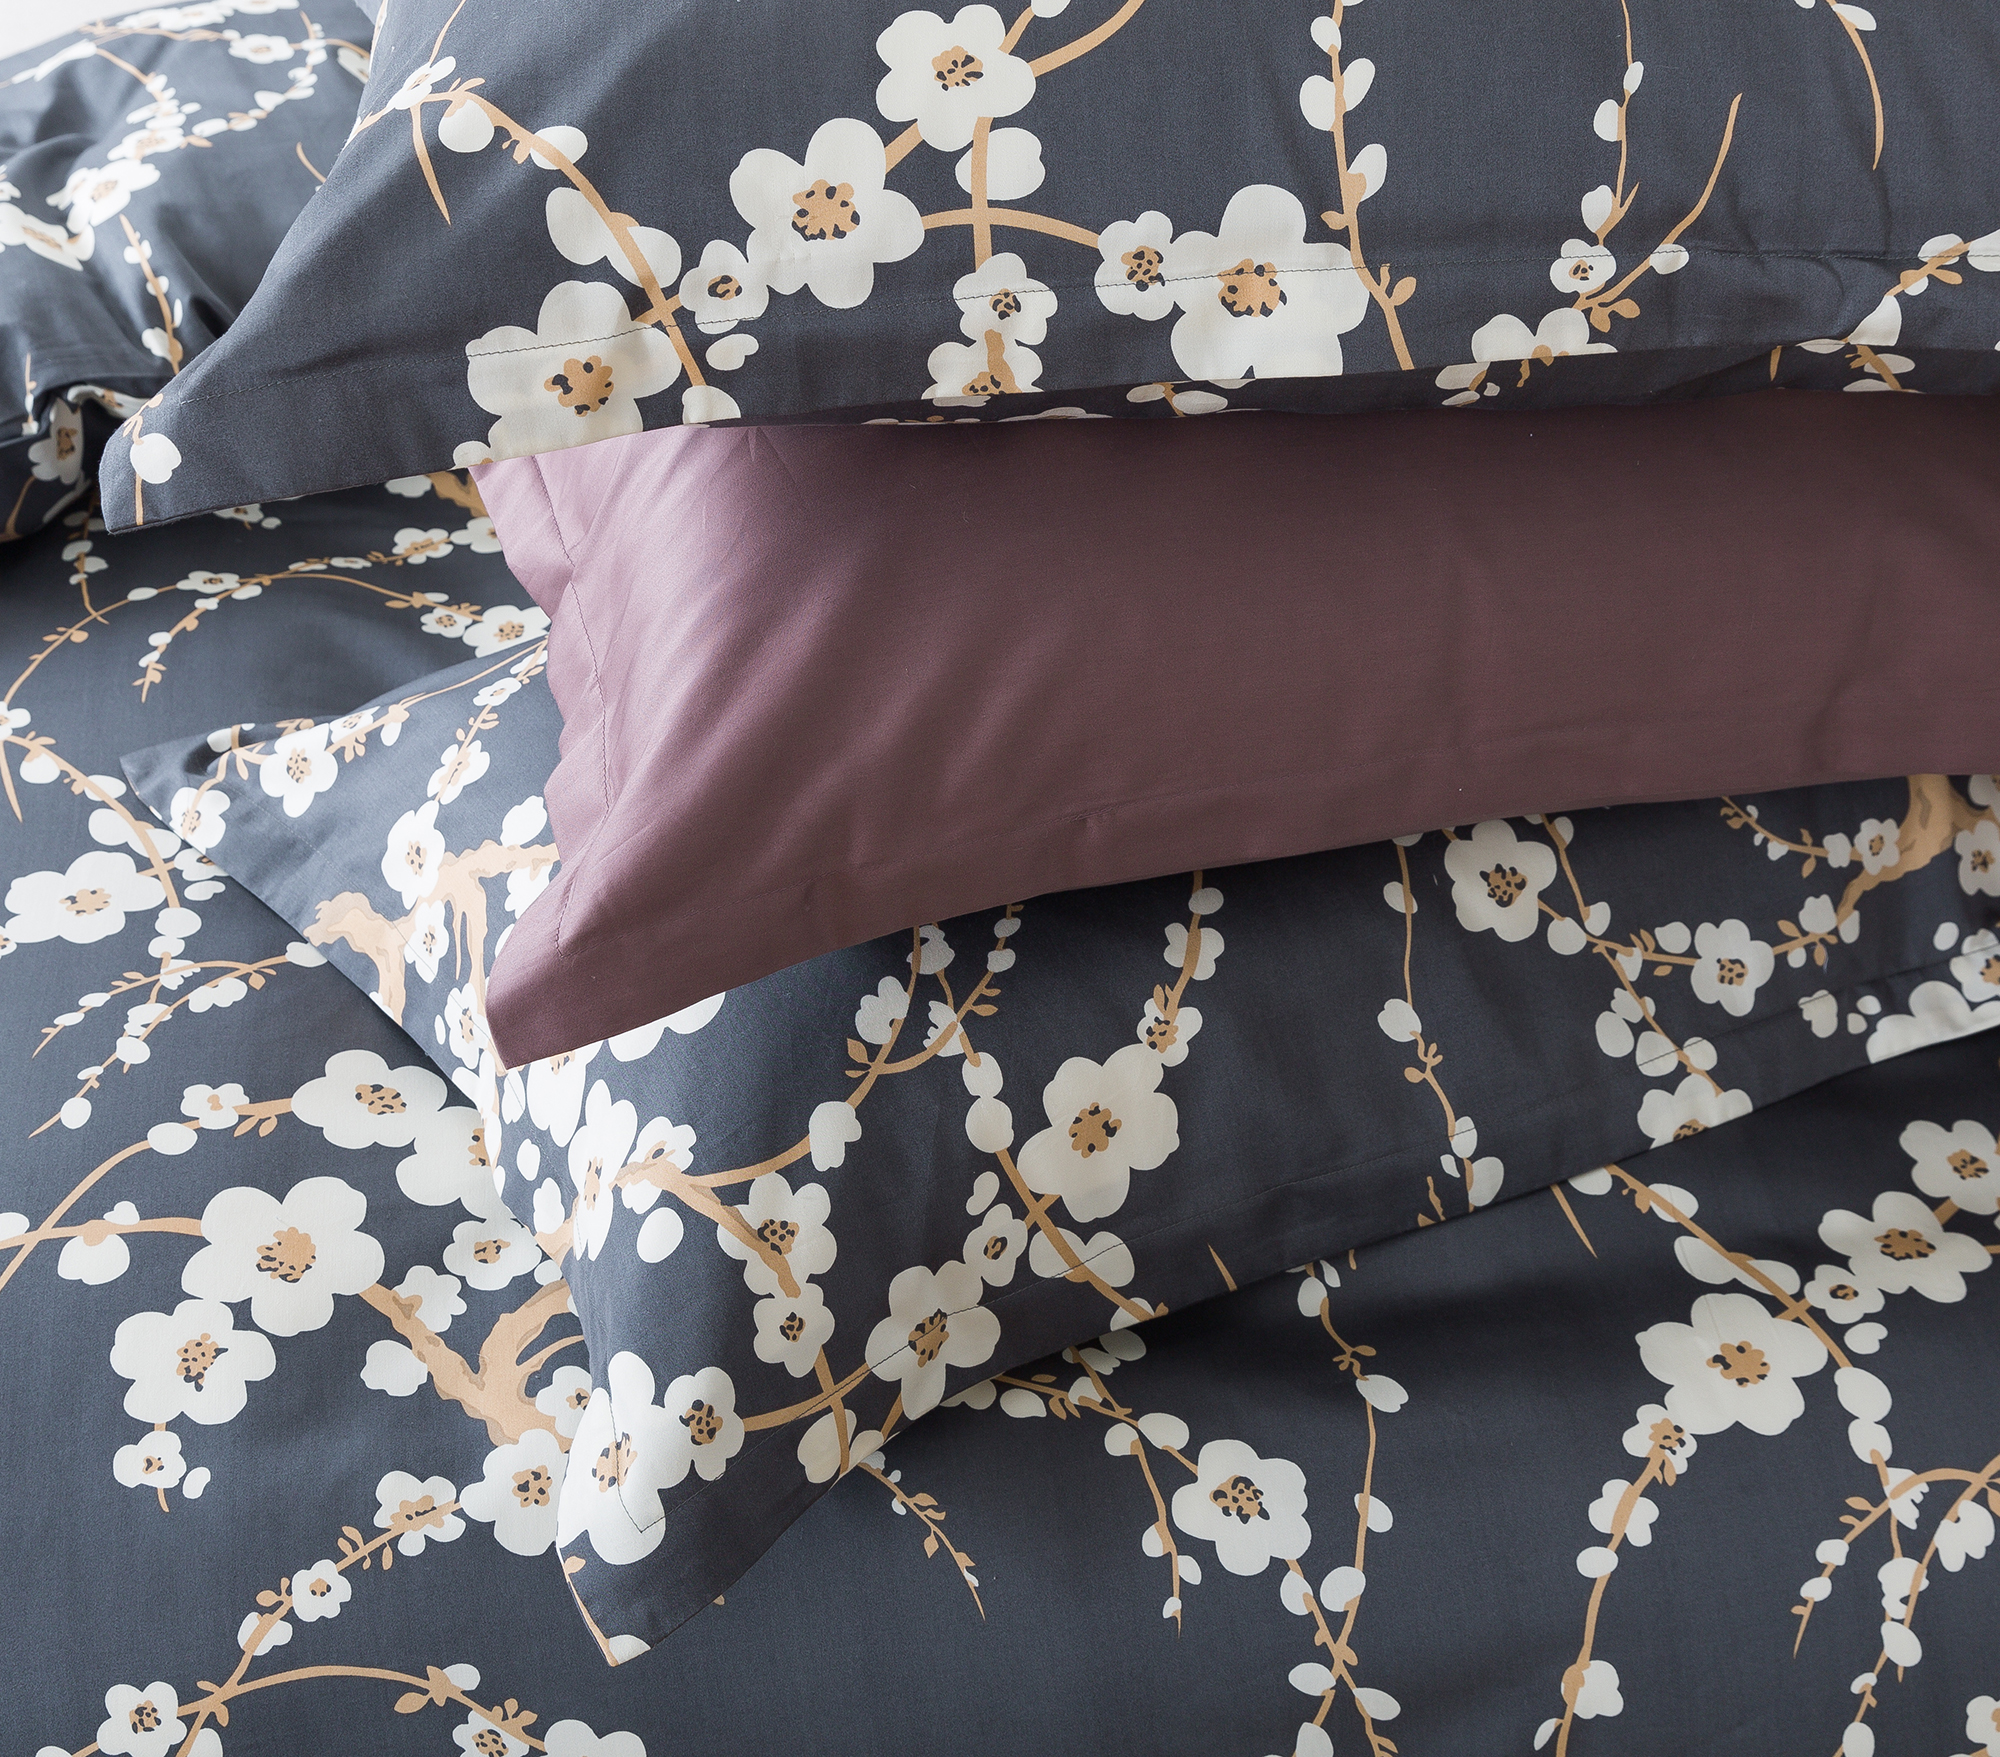 Details about   Japanese Garden With Cranes Floral 100% Cotton Sateen Sheet Set by Roostery 